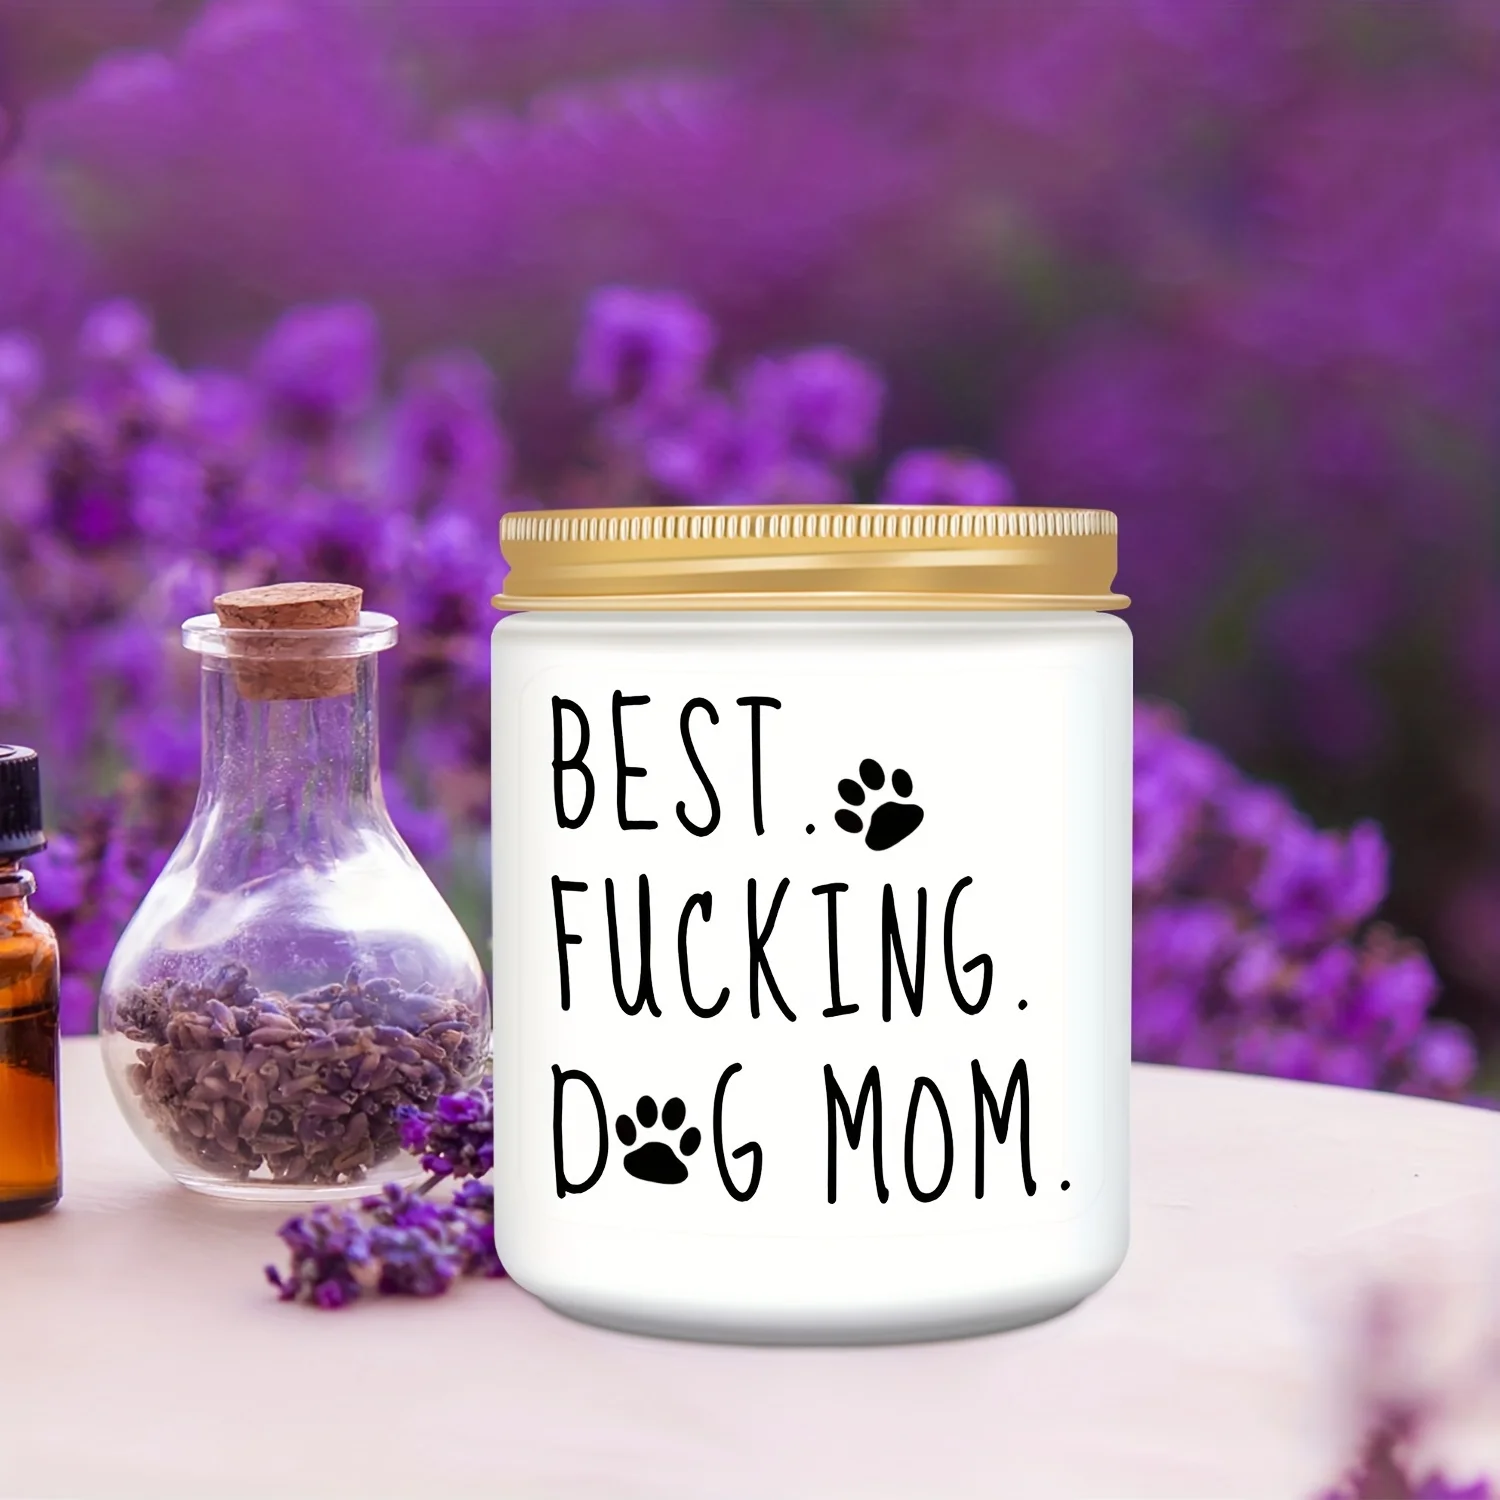 

Dog Mom Gifts for Women, Dog Mom Gifts, Best Gifts for Dog Owners&Pet Lovers for Birthday Valentines Day Christmas Anniversary M